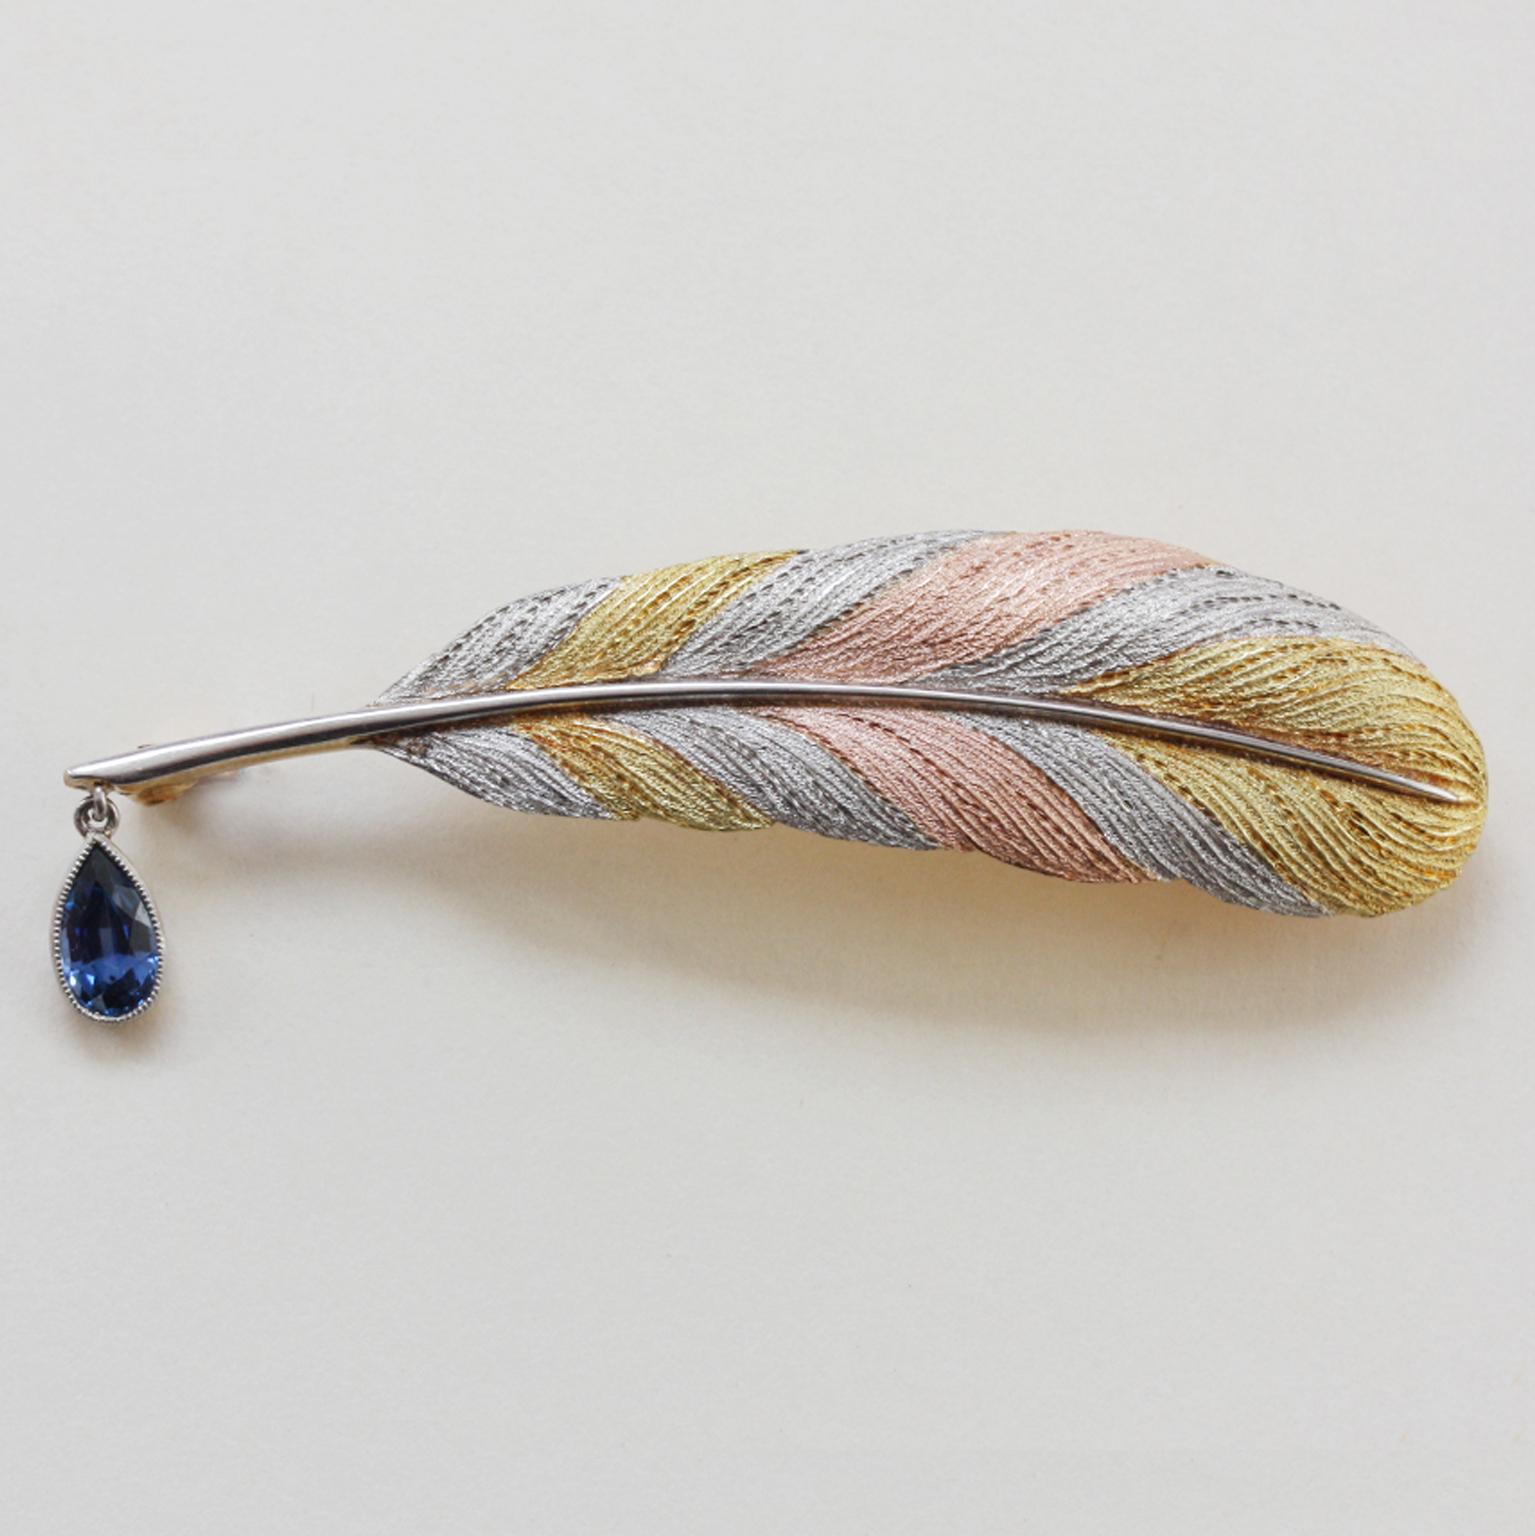 A brooch representing a quill pen. At the tip of quill is a sapphire drop mounted in platinum – an ink drop or…. a tear drop (app. 0.45 ct.). The feather is made of platinum, pink and yellow gold, engraved on 15-carat gold. England, circa 1900, in